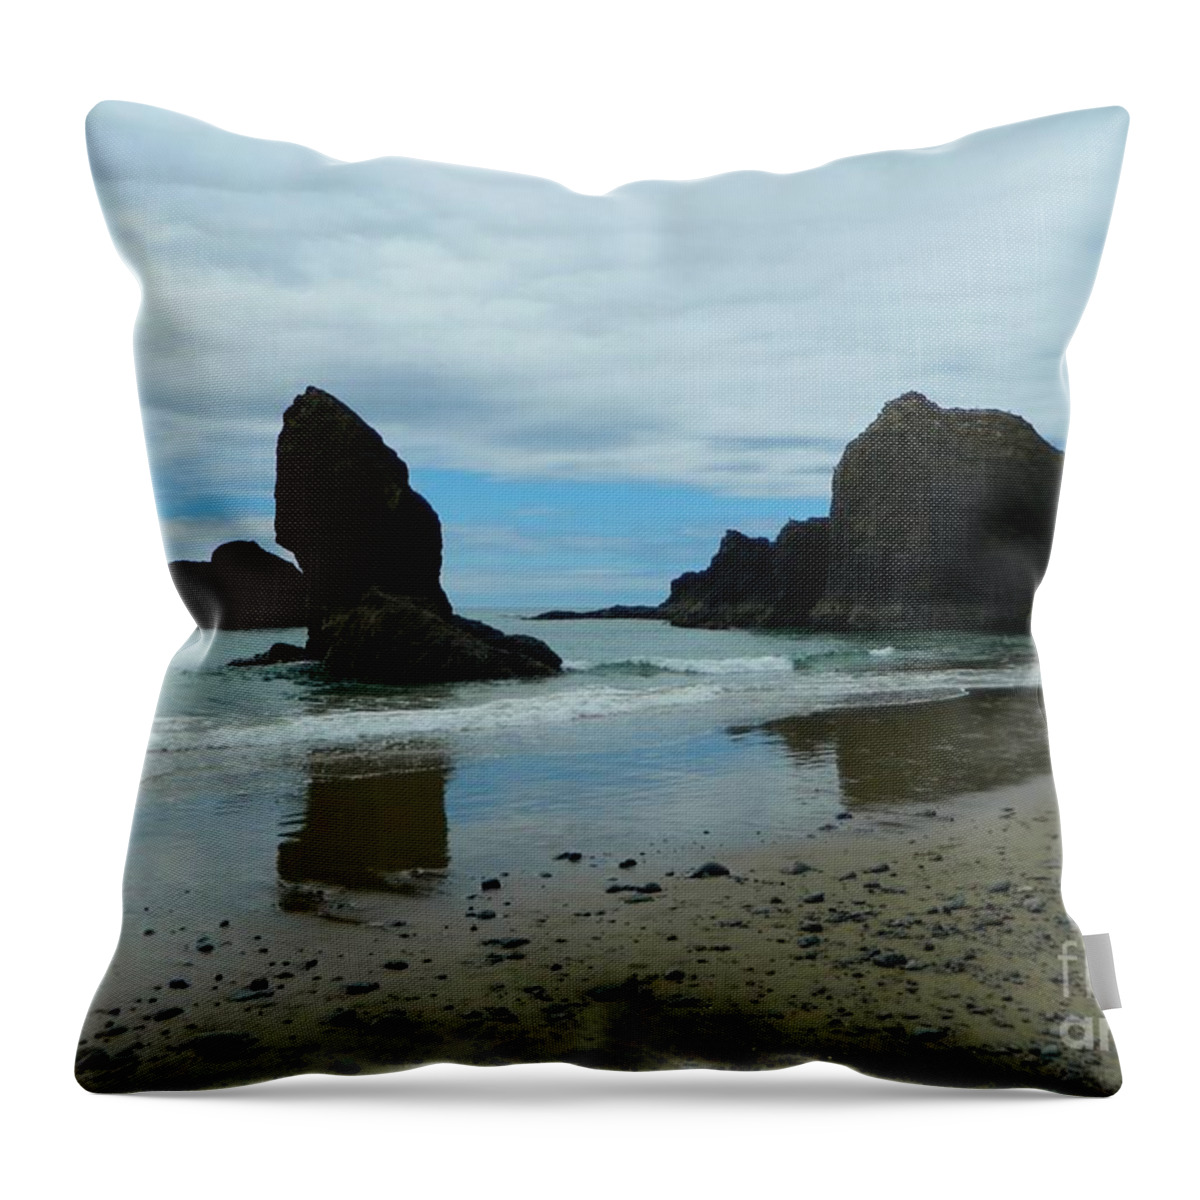 Rocks Throw Pillow featuring the photograph Rock Reflections by Gallery Of Hope 